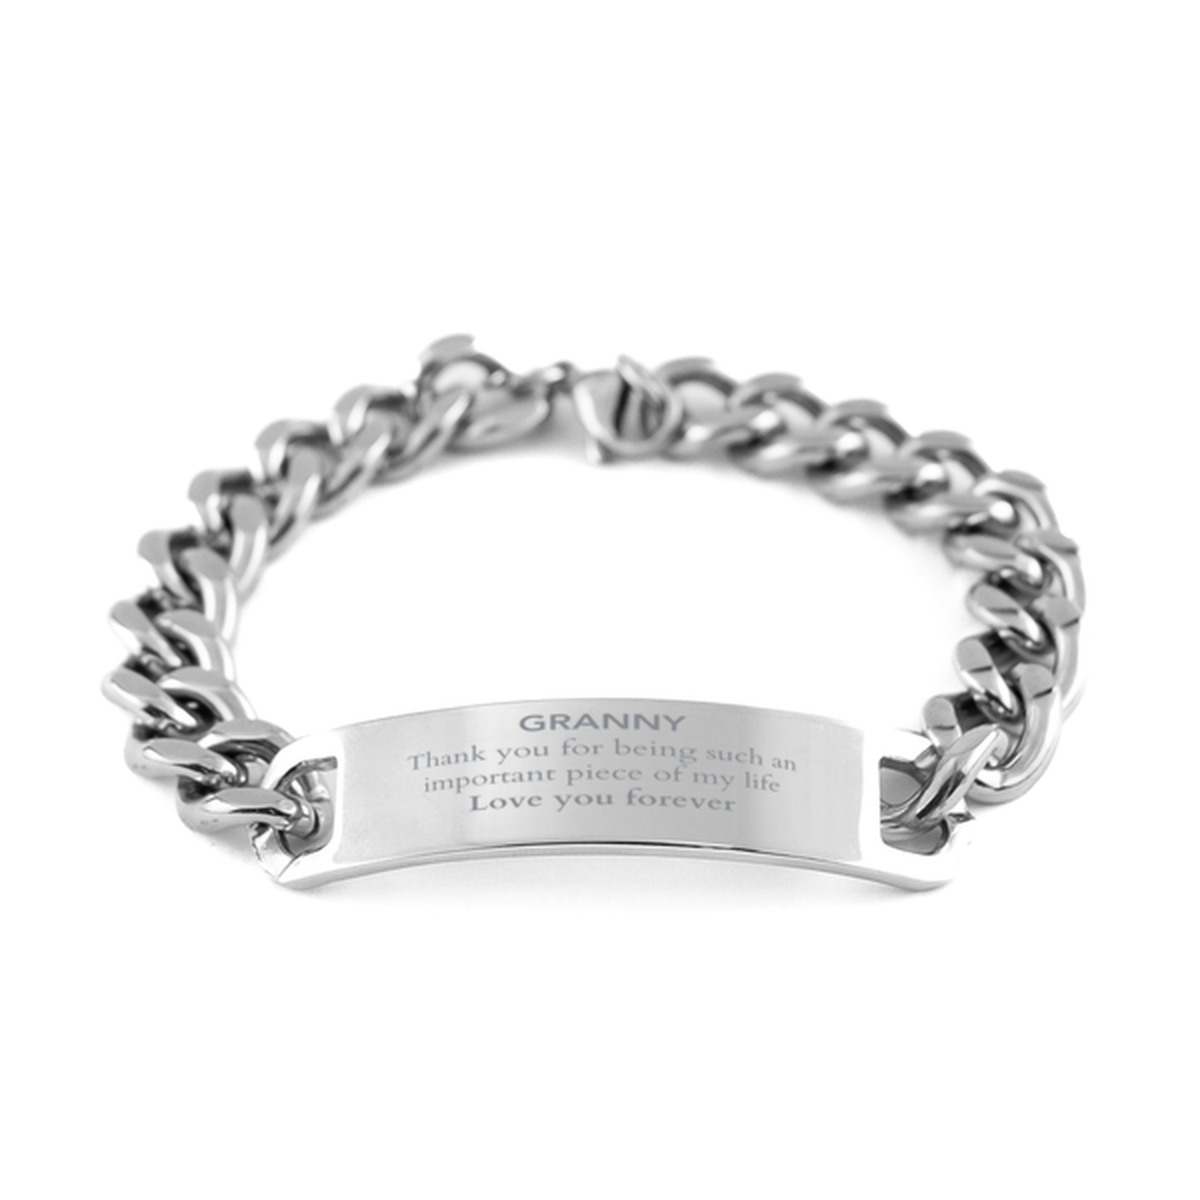 Appropriate Granny Cuban Chain Stainless Steel Bracelet Epic Birthday Gifts for Granny Thank you for being such an important piece of my life Granny Christmas Mothers Fathers Day